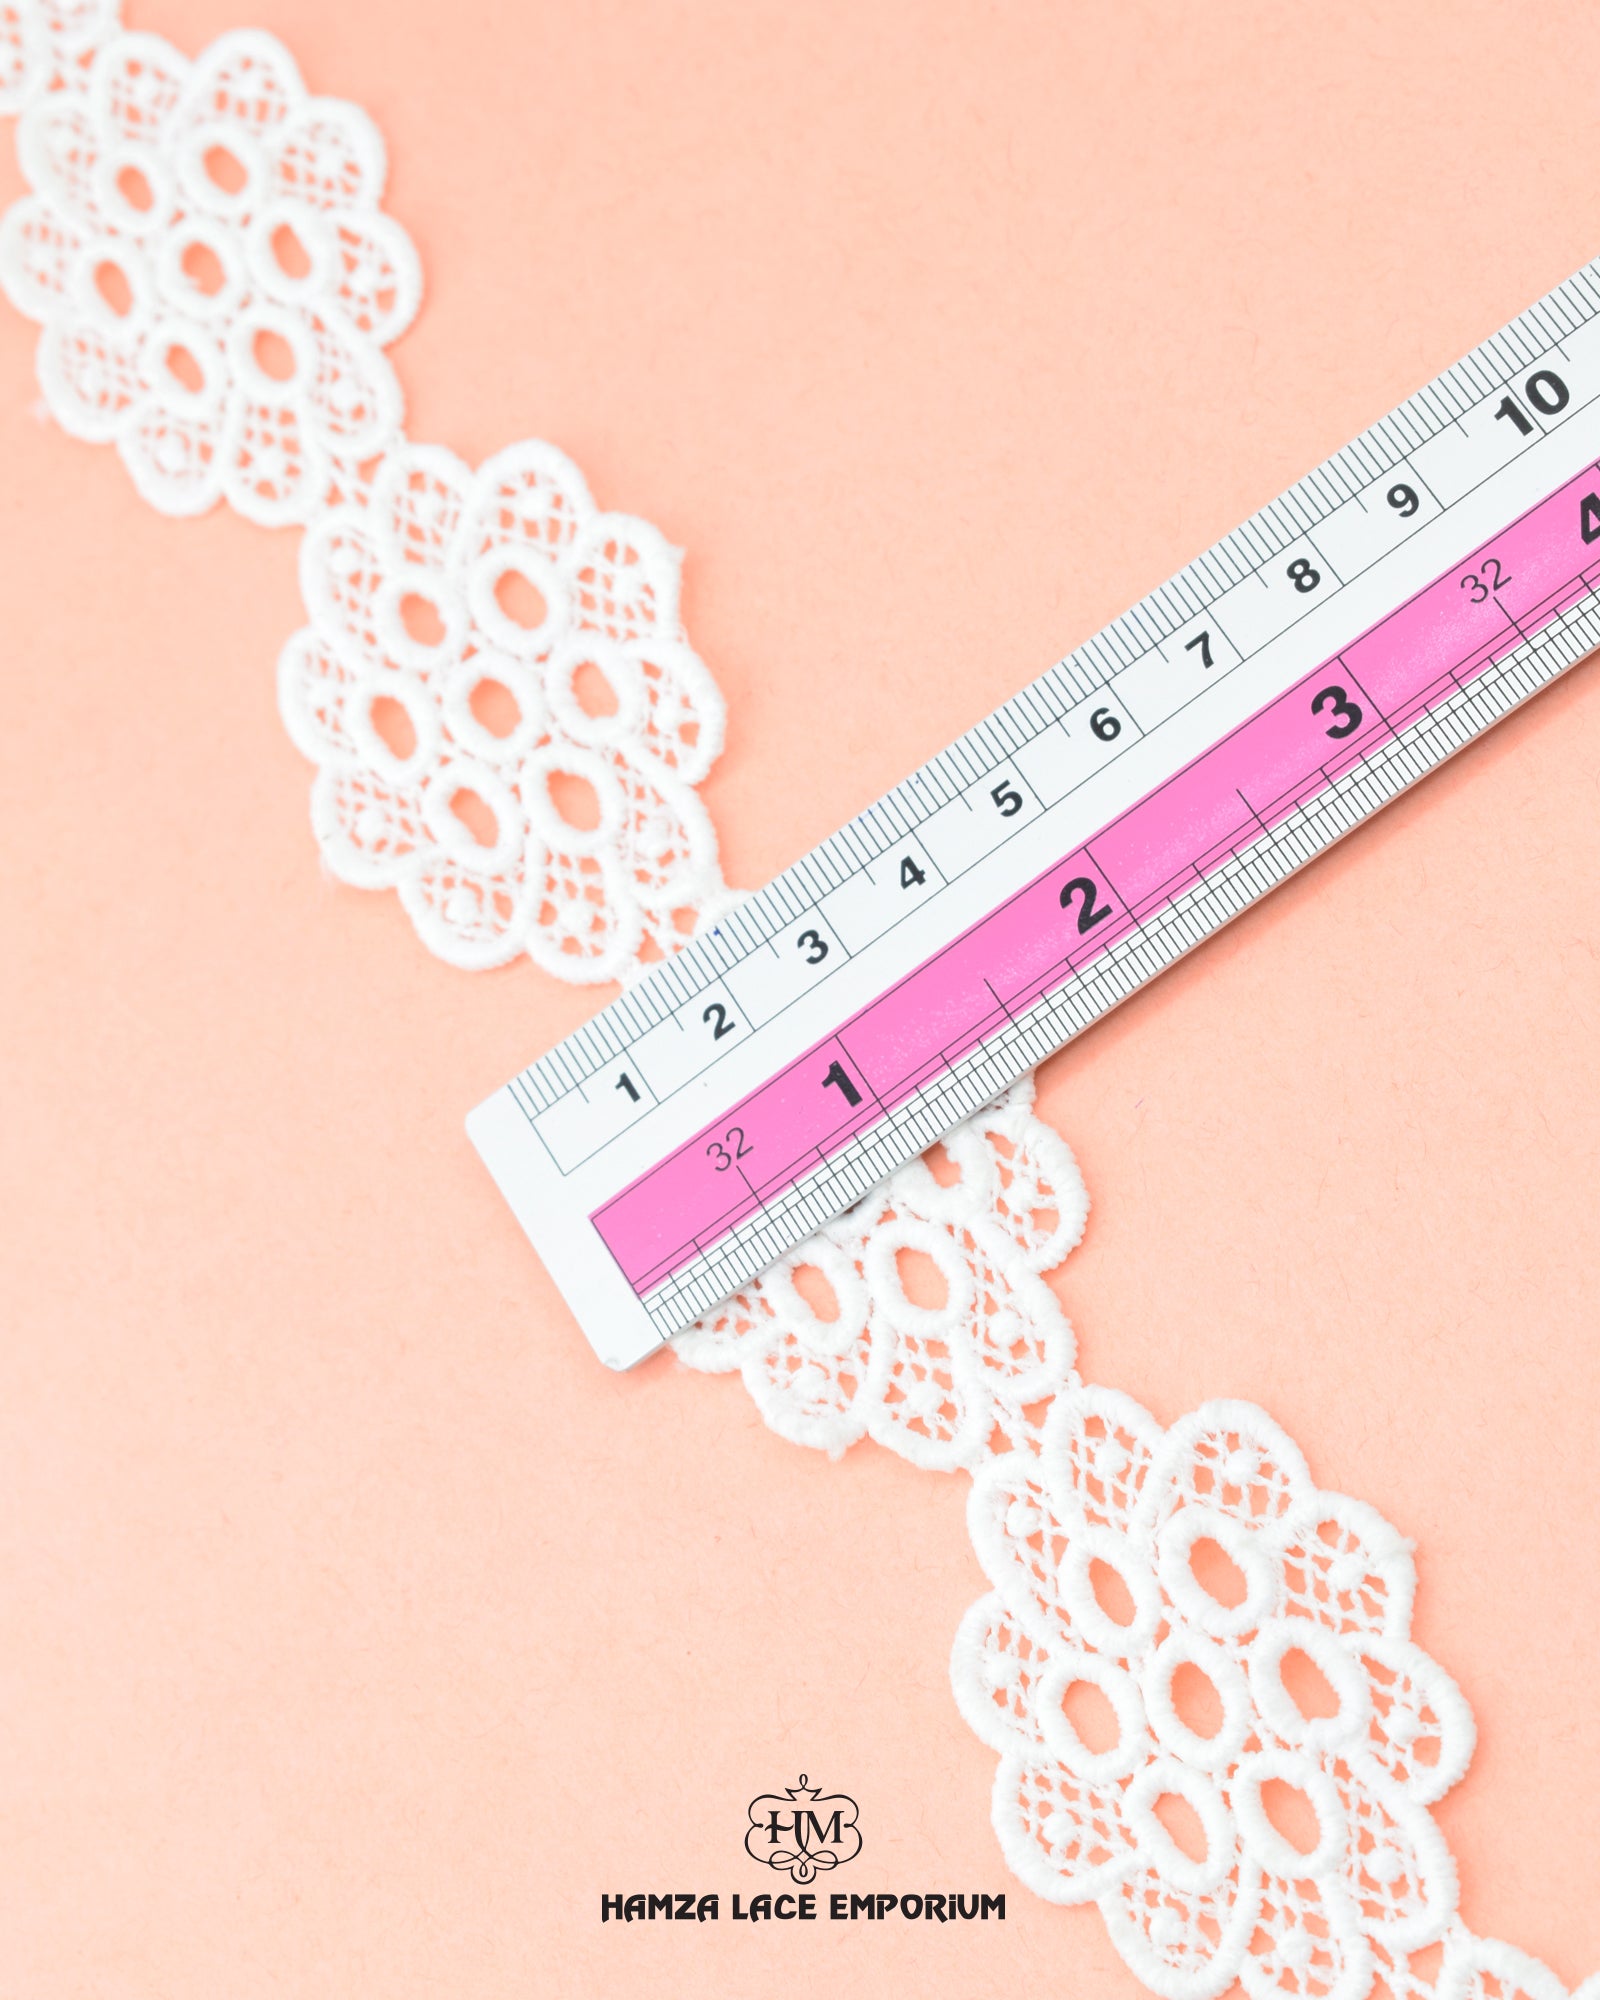 The size of the 'Center Filling Lace 22987' is given with the help of a ruler.